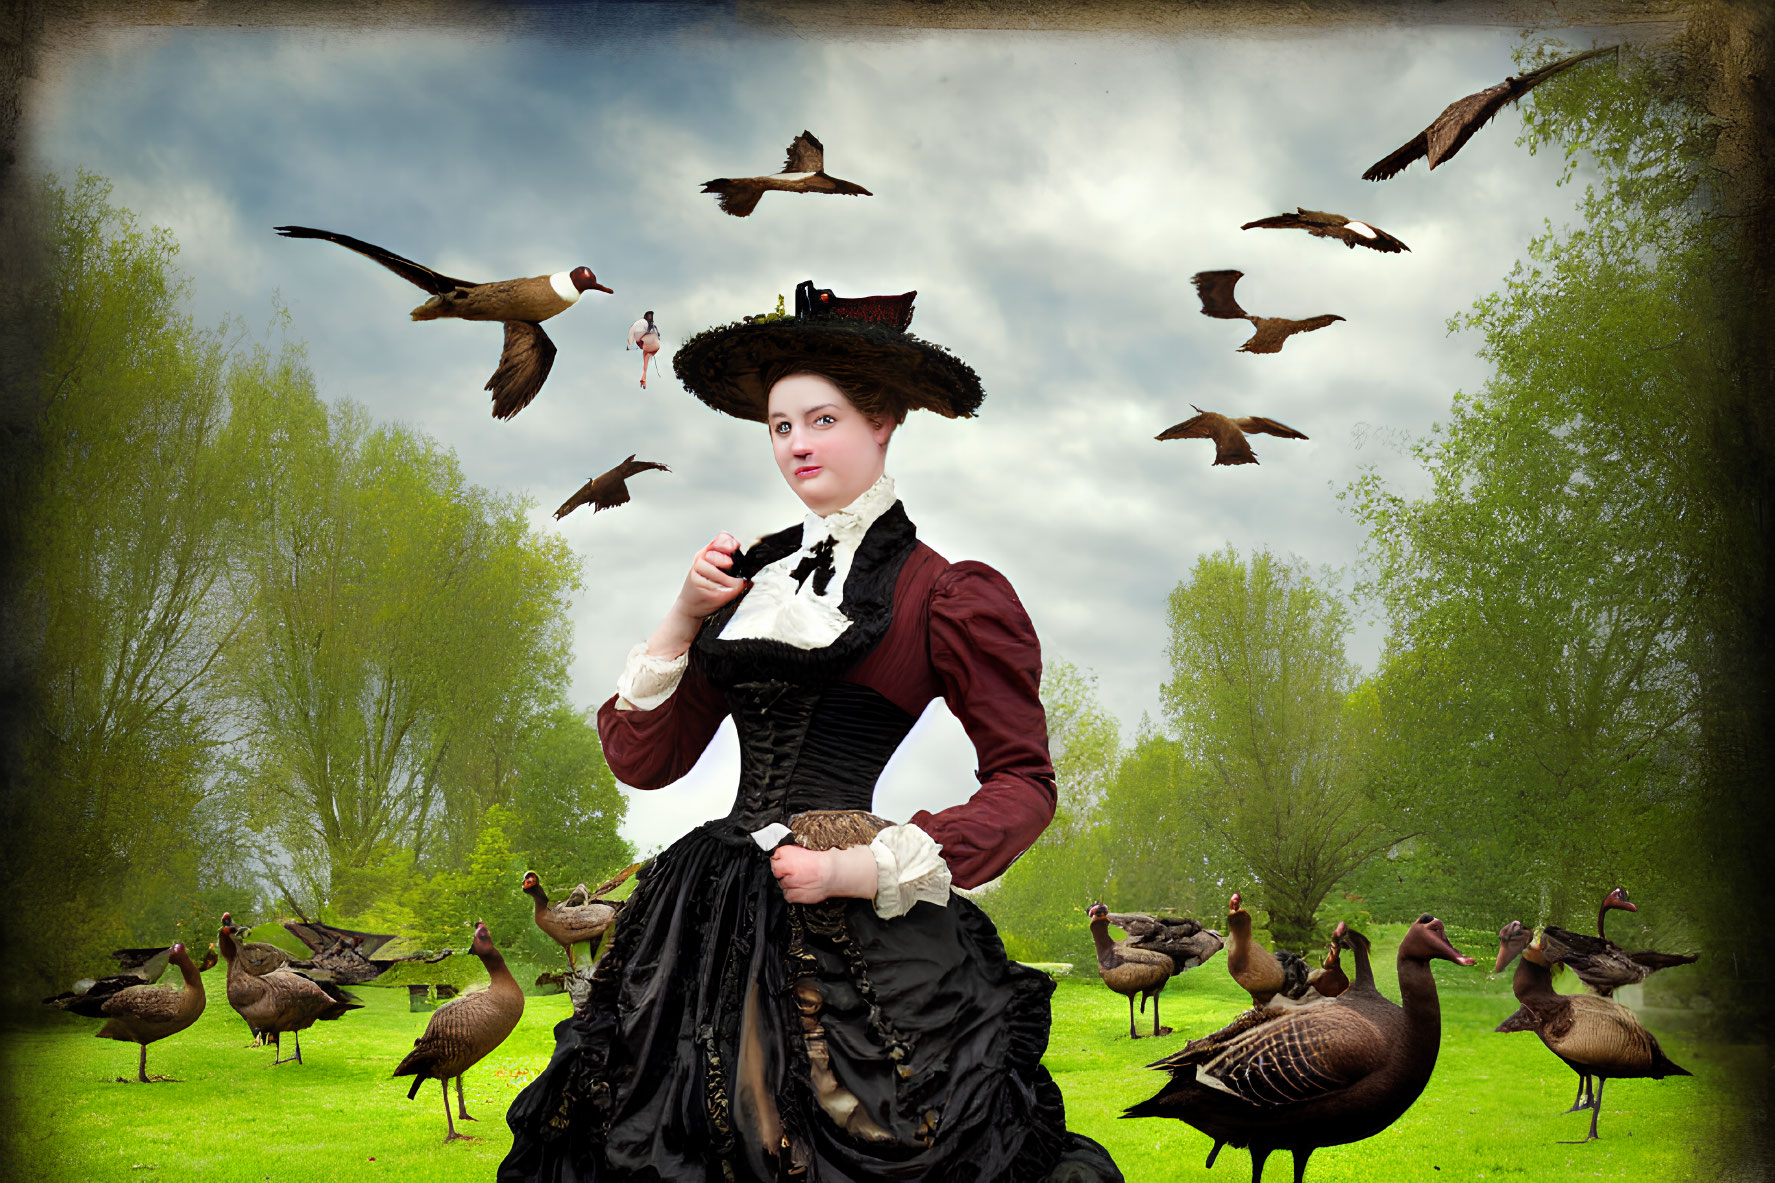 Victorian woman with umbrella surrounded by ducks and birds in meadow